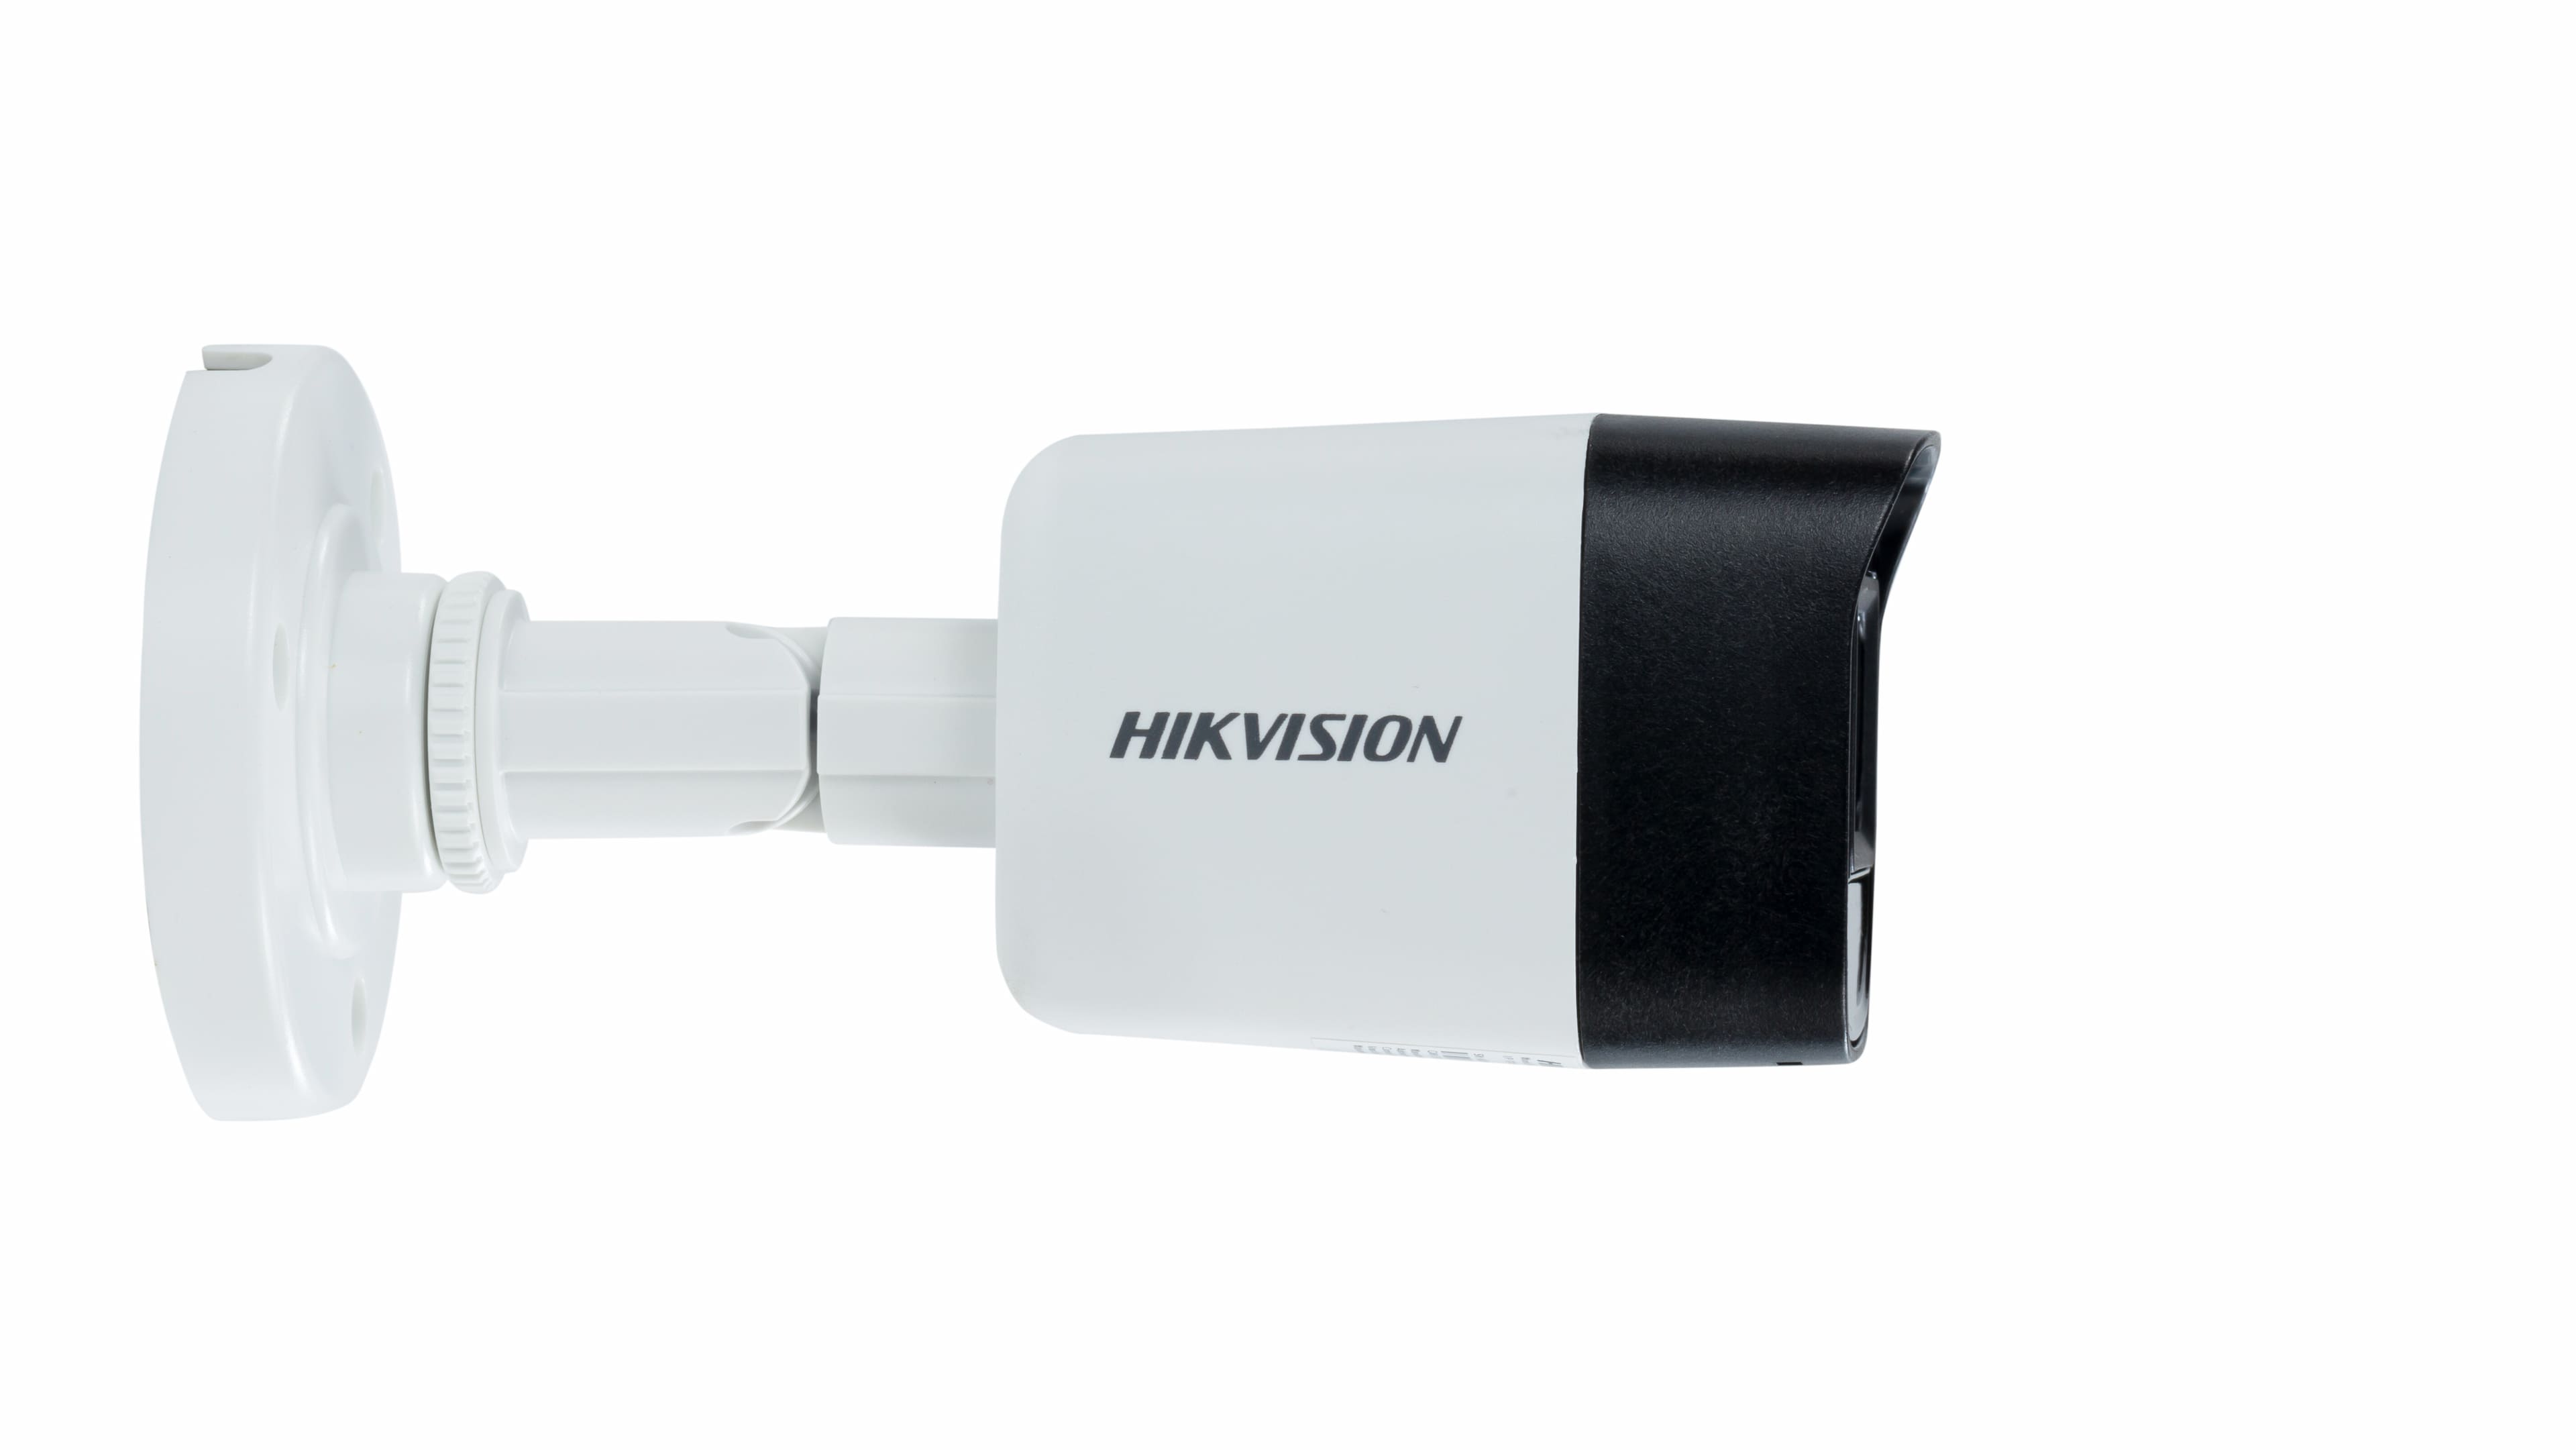 Hikvision 2MP Audio Mini Outdoor Bullet Camera, DS-2CE16D0T-ITPFS, Day/Night Vision, Smart IR, Built-in Mic, Digital WDR, IP67, 3.6 mm Lens